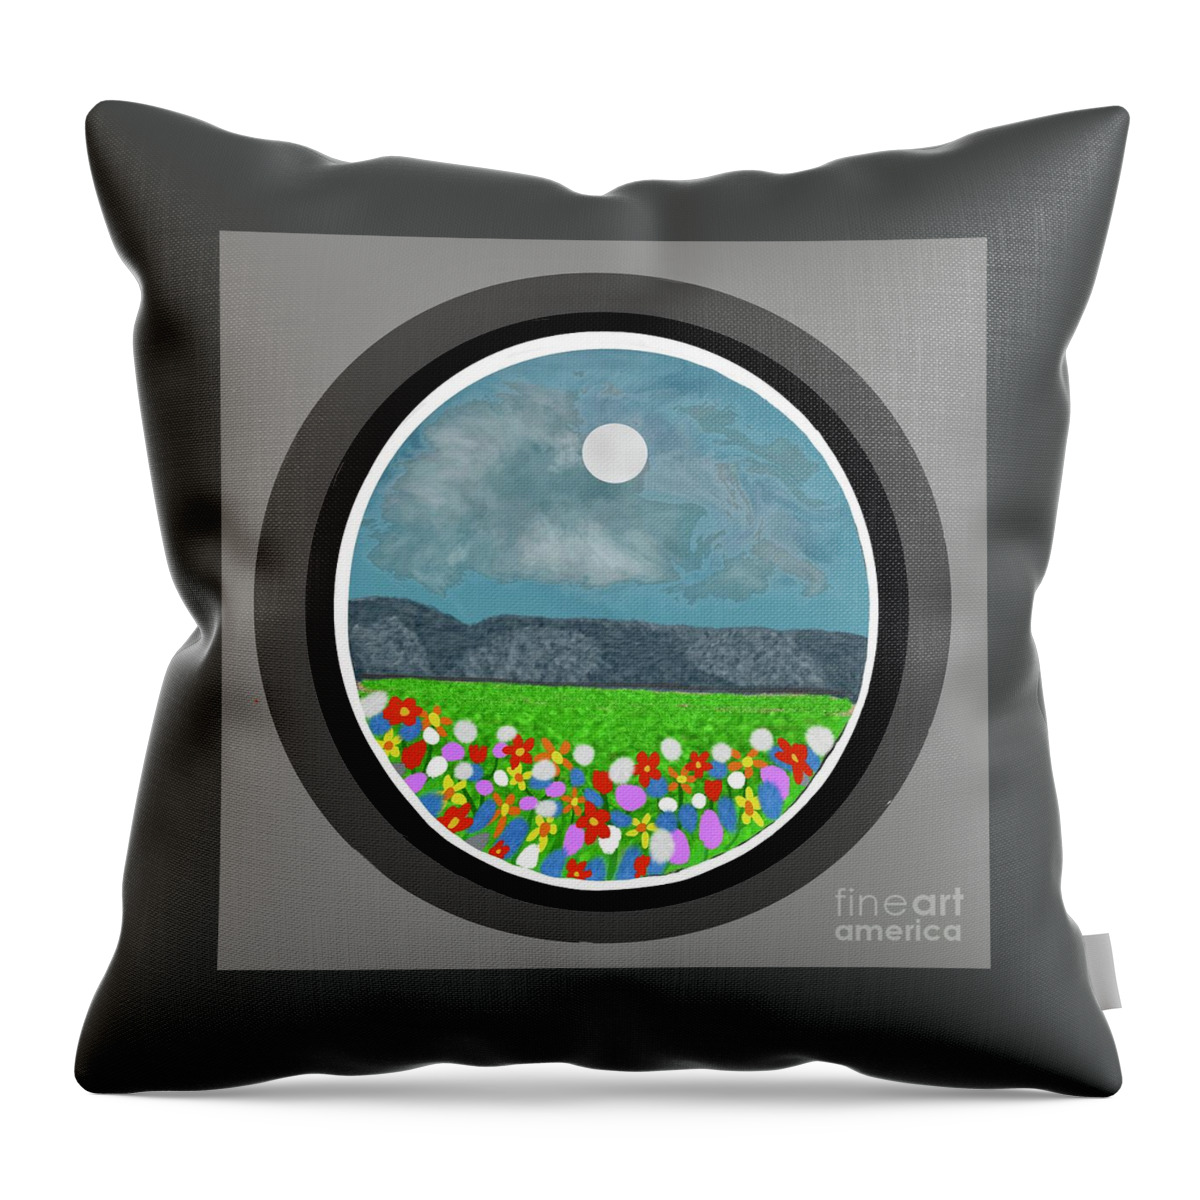 At The End Of The Day Throw Pillow featuring the digital art At the end of the day by Elaine Hayward